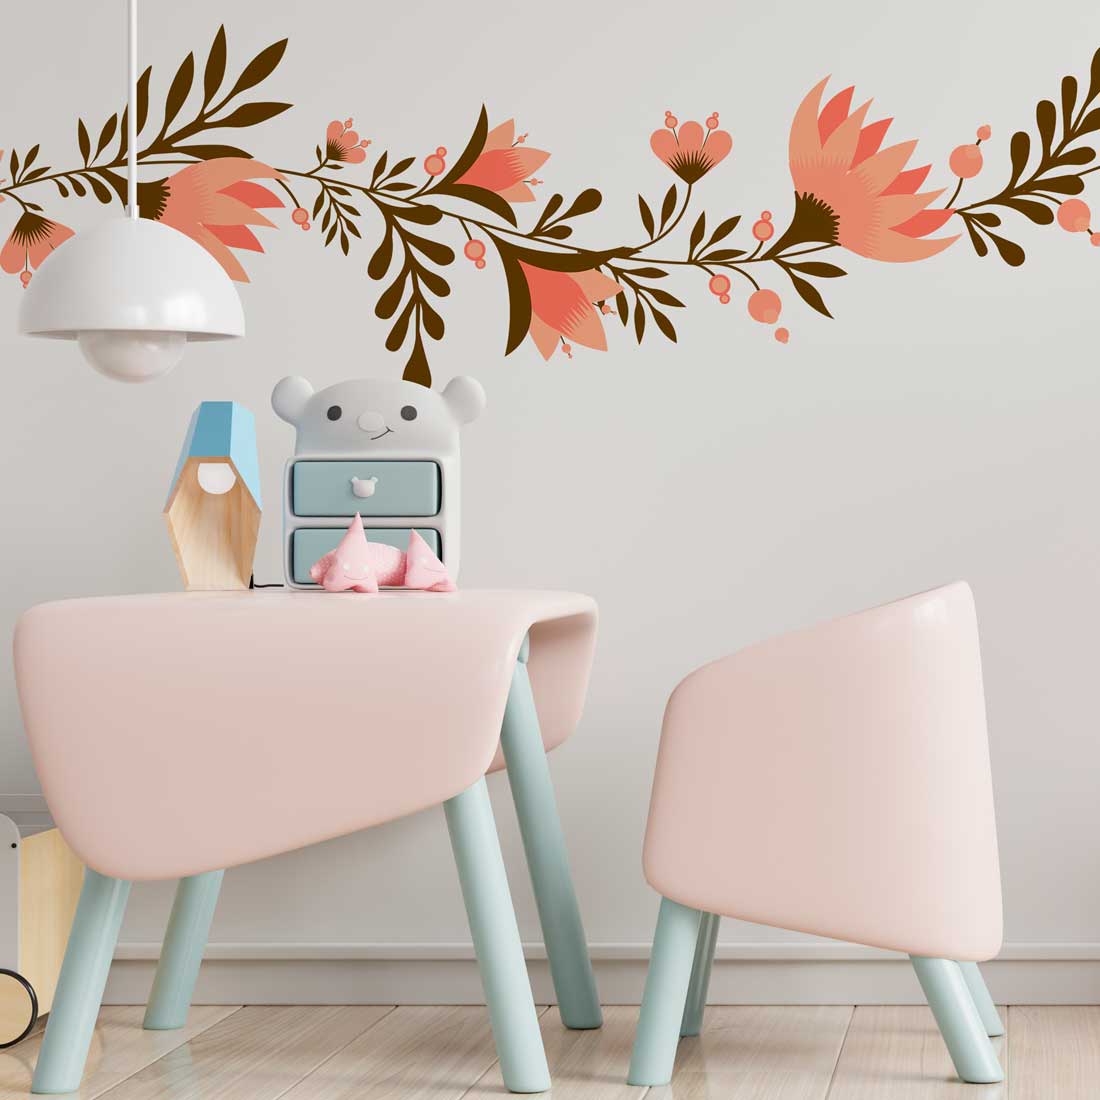 Room with a table and two chairs and a wall with flowers on it.